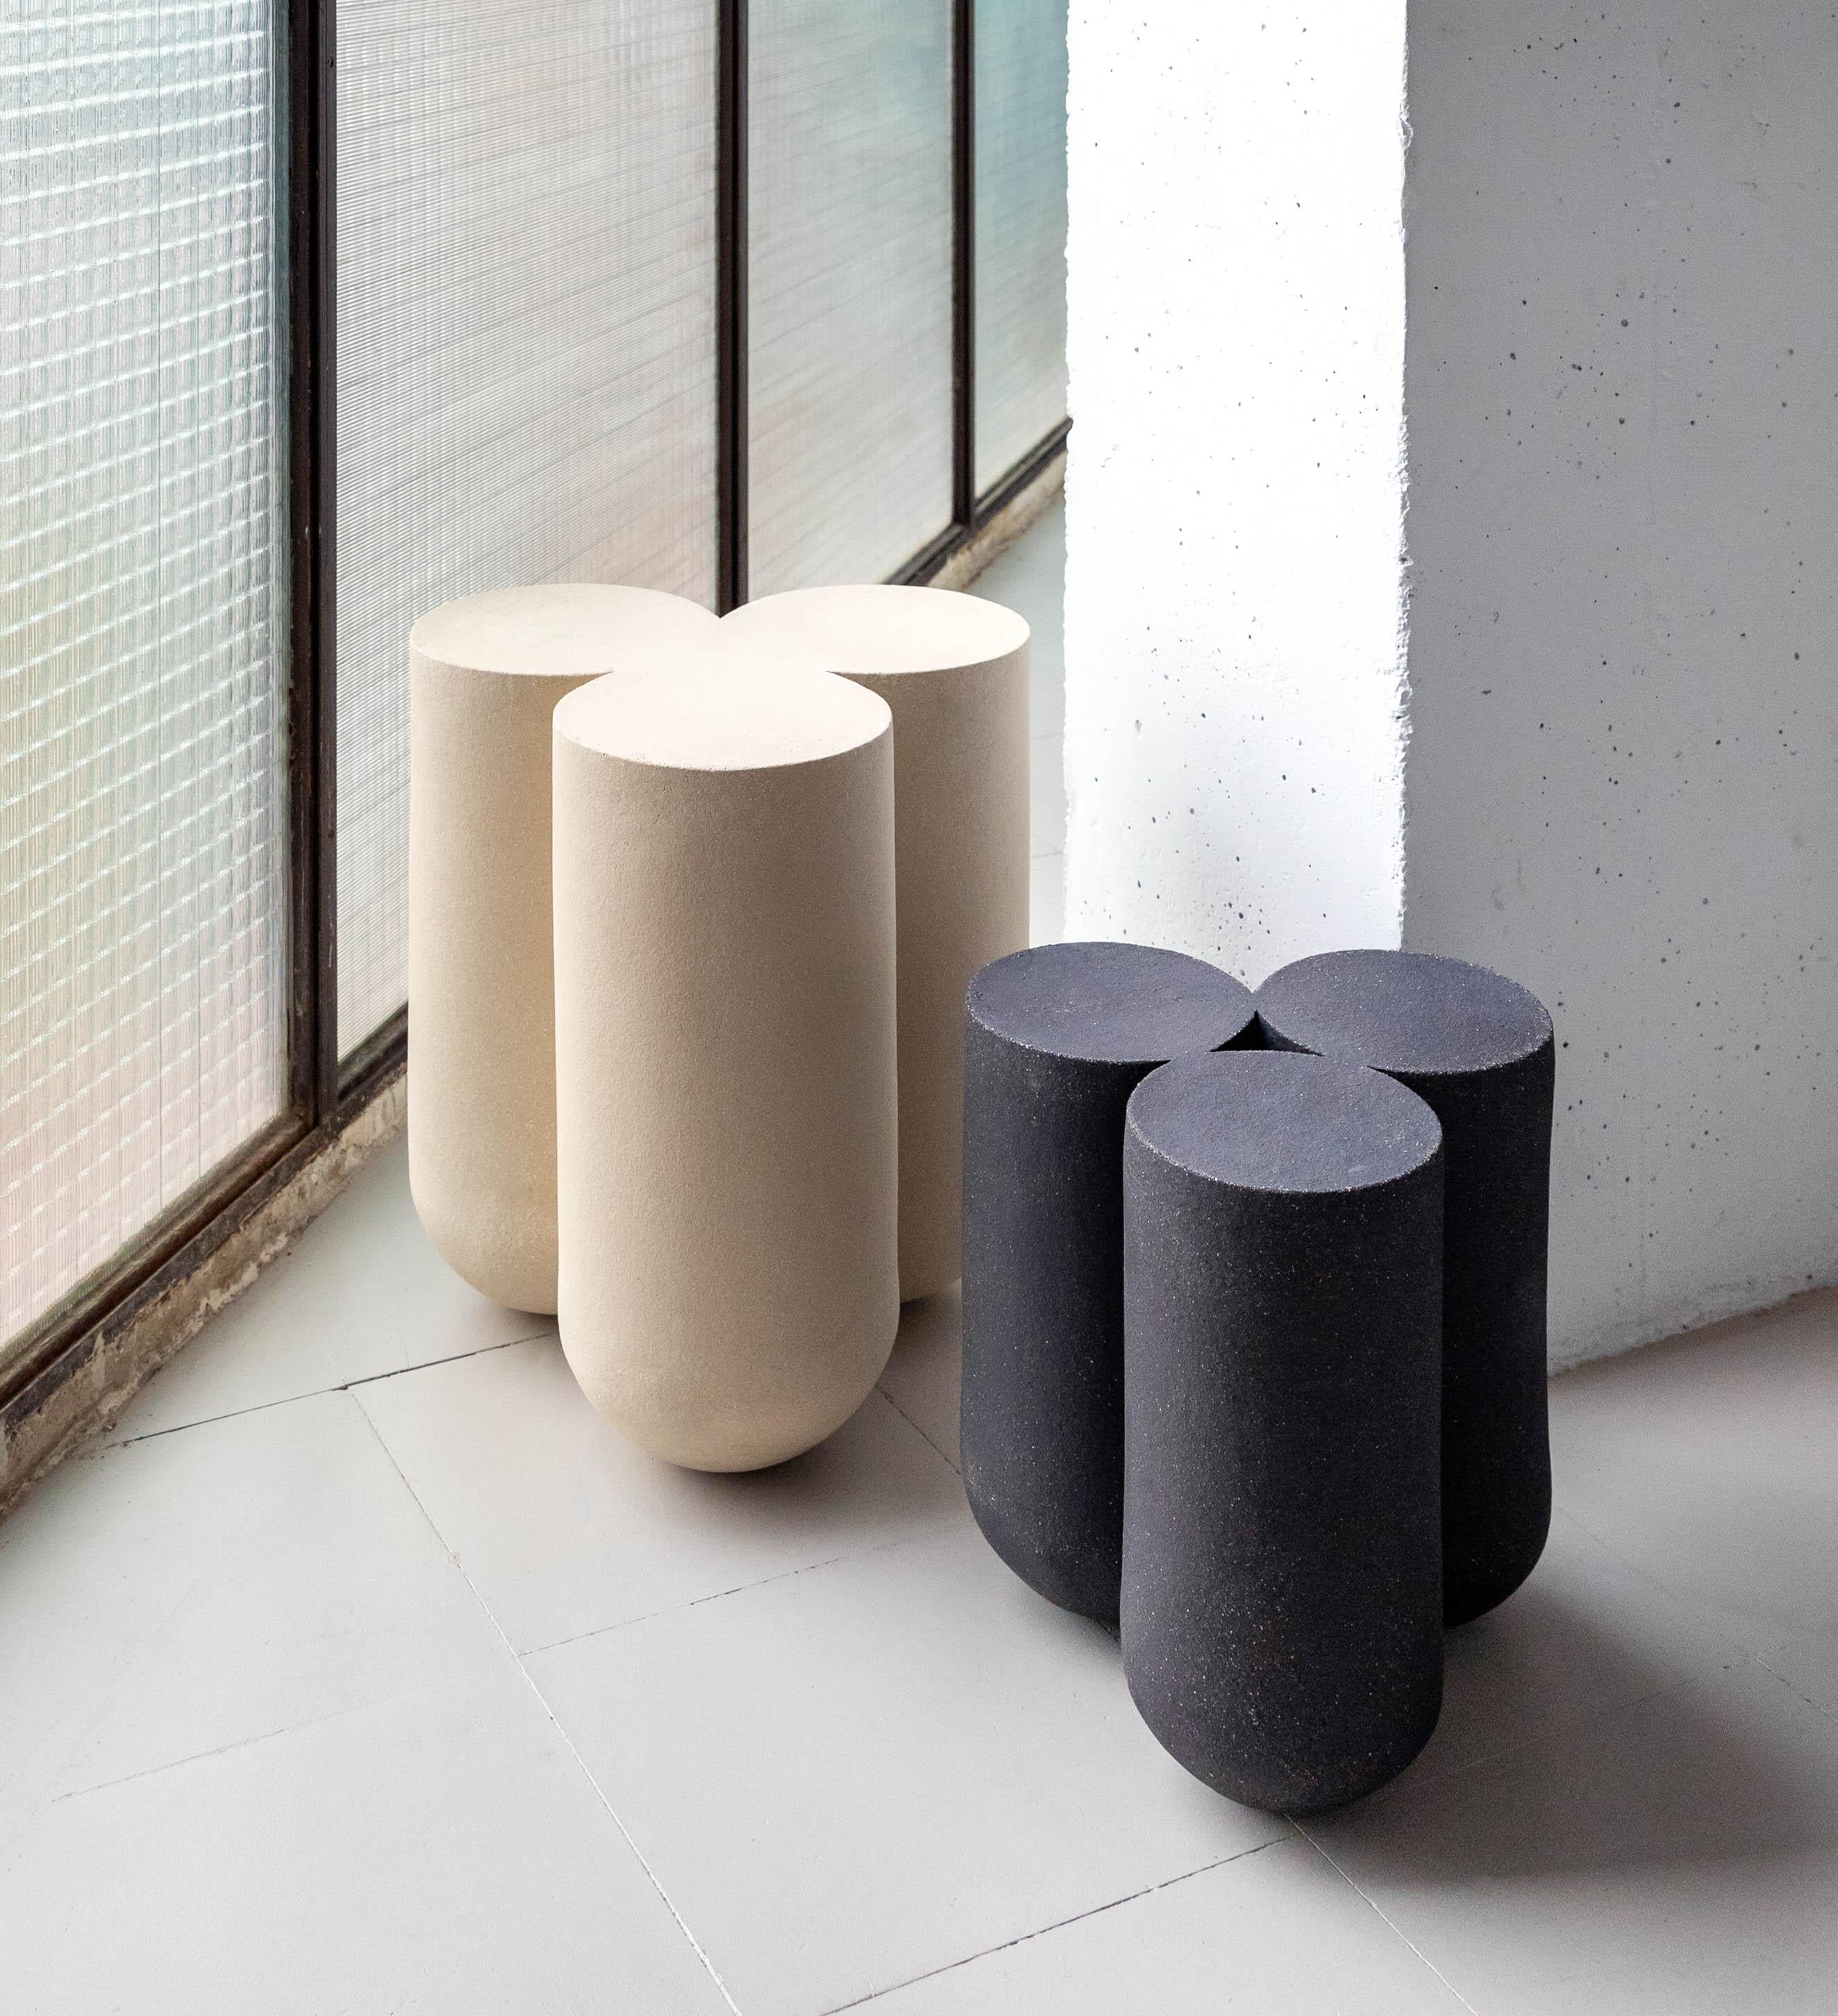 Set of 2 clay moor side tables by Lisa Allegra
Moor collection
Dimensions: side table Ø 42 x 47 cm, small side table Ø 32 x 35 cm.
Materials: Clay

Born in 1986 in Paris, Lisa Allegra has earned in 2010 a degree in furniture design from the